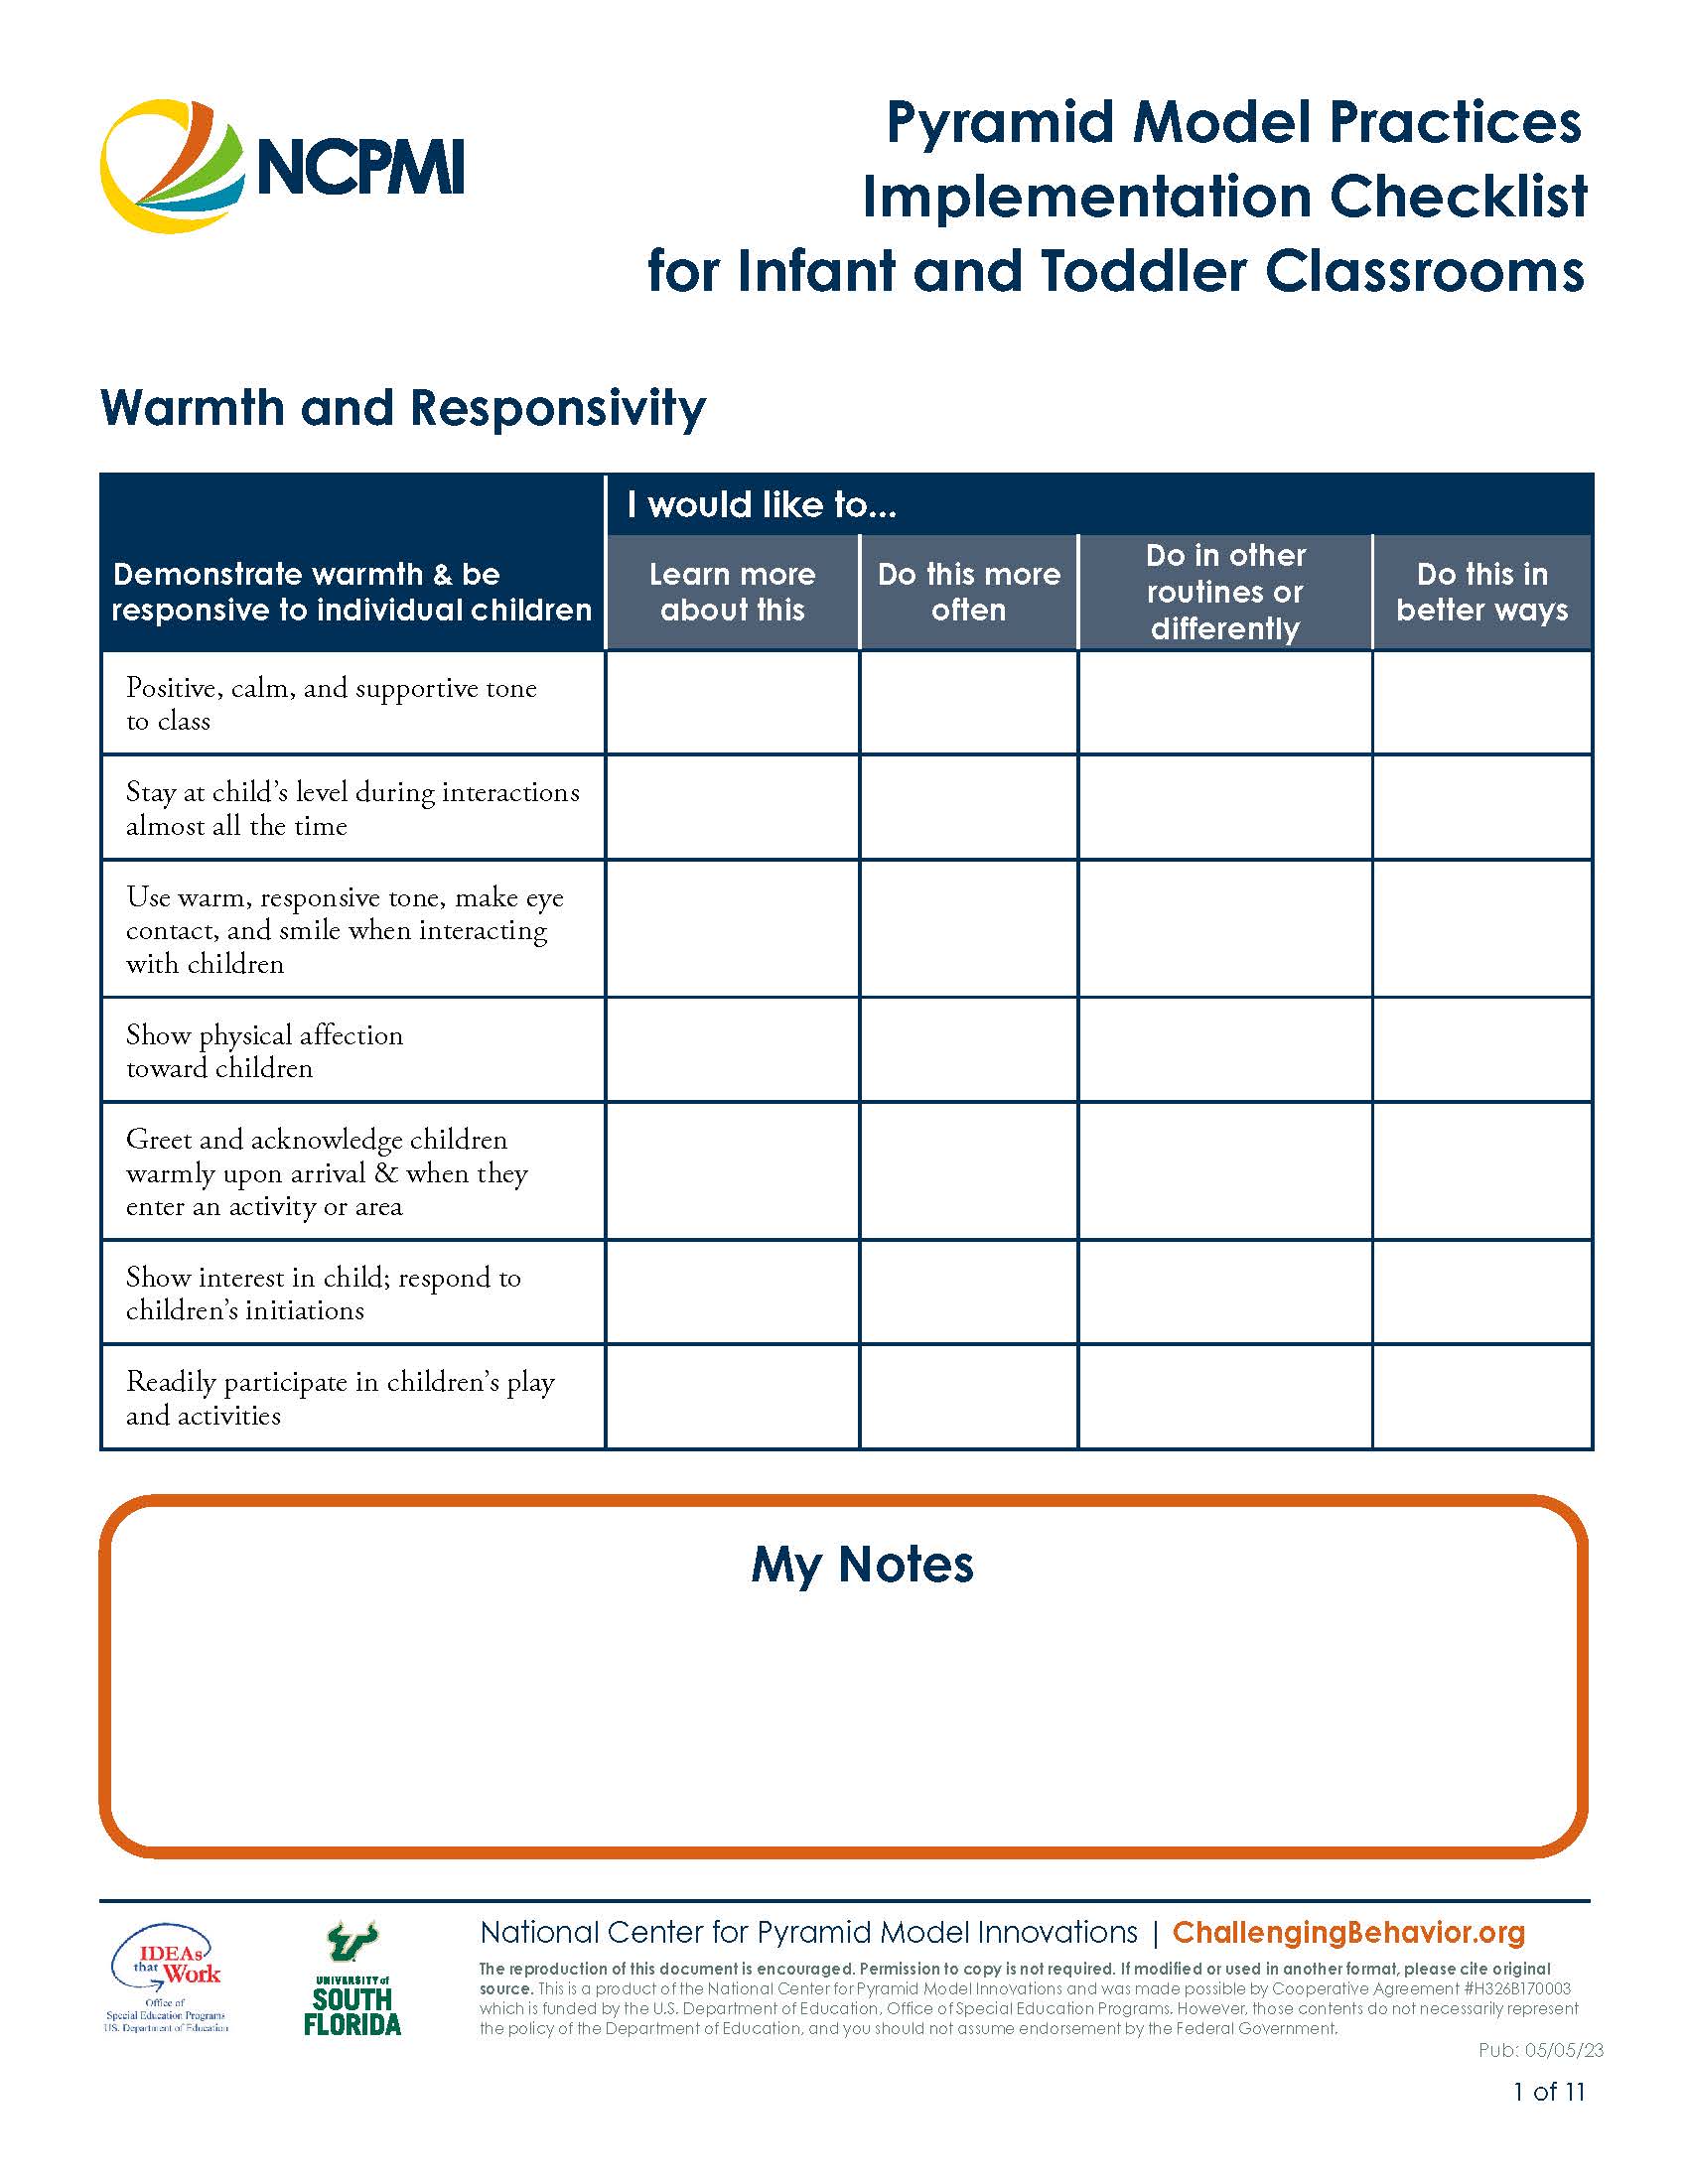 Pyramid Model Practices Implementation Checklist for Infant and Toddler Classrooms